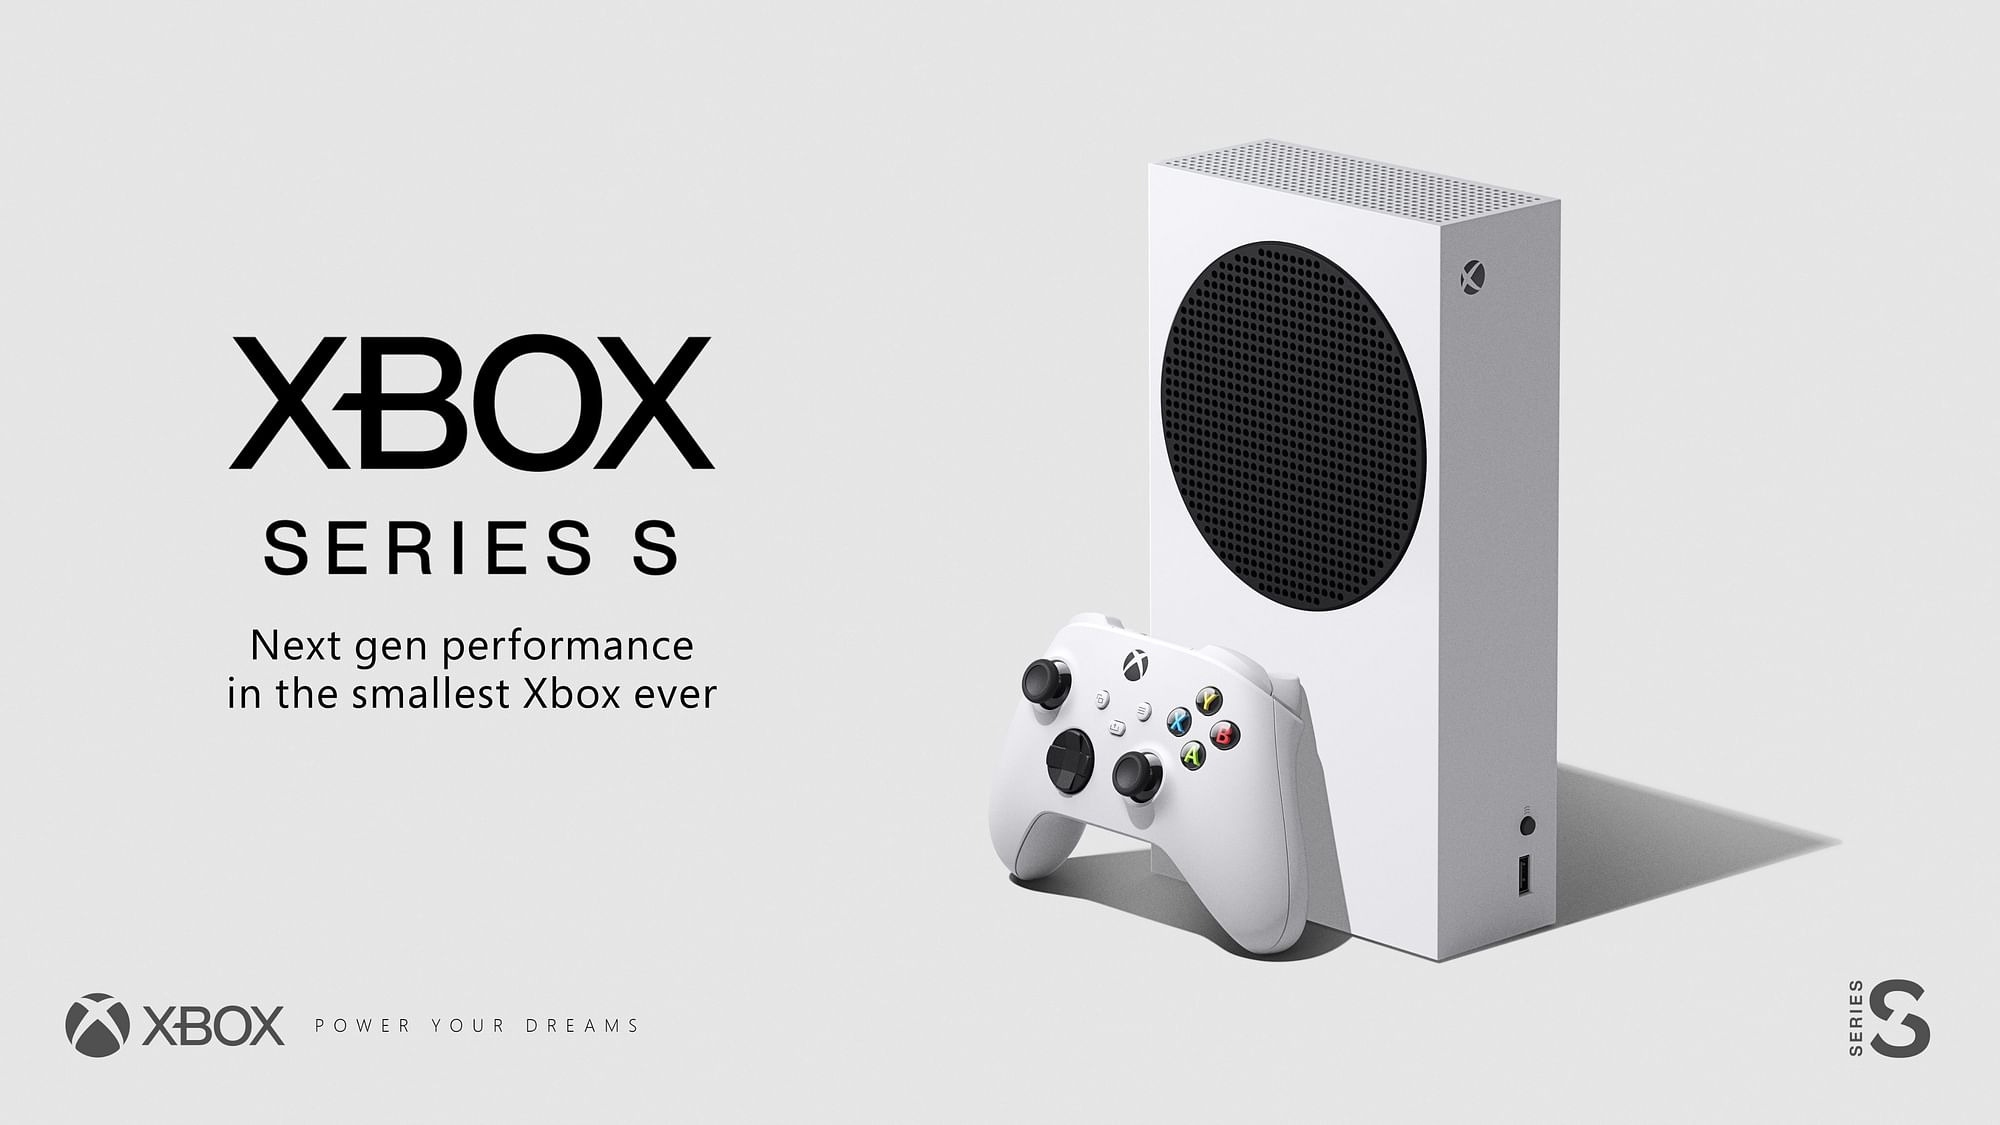 The Xbox Series S is the smallest Xbox till date.